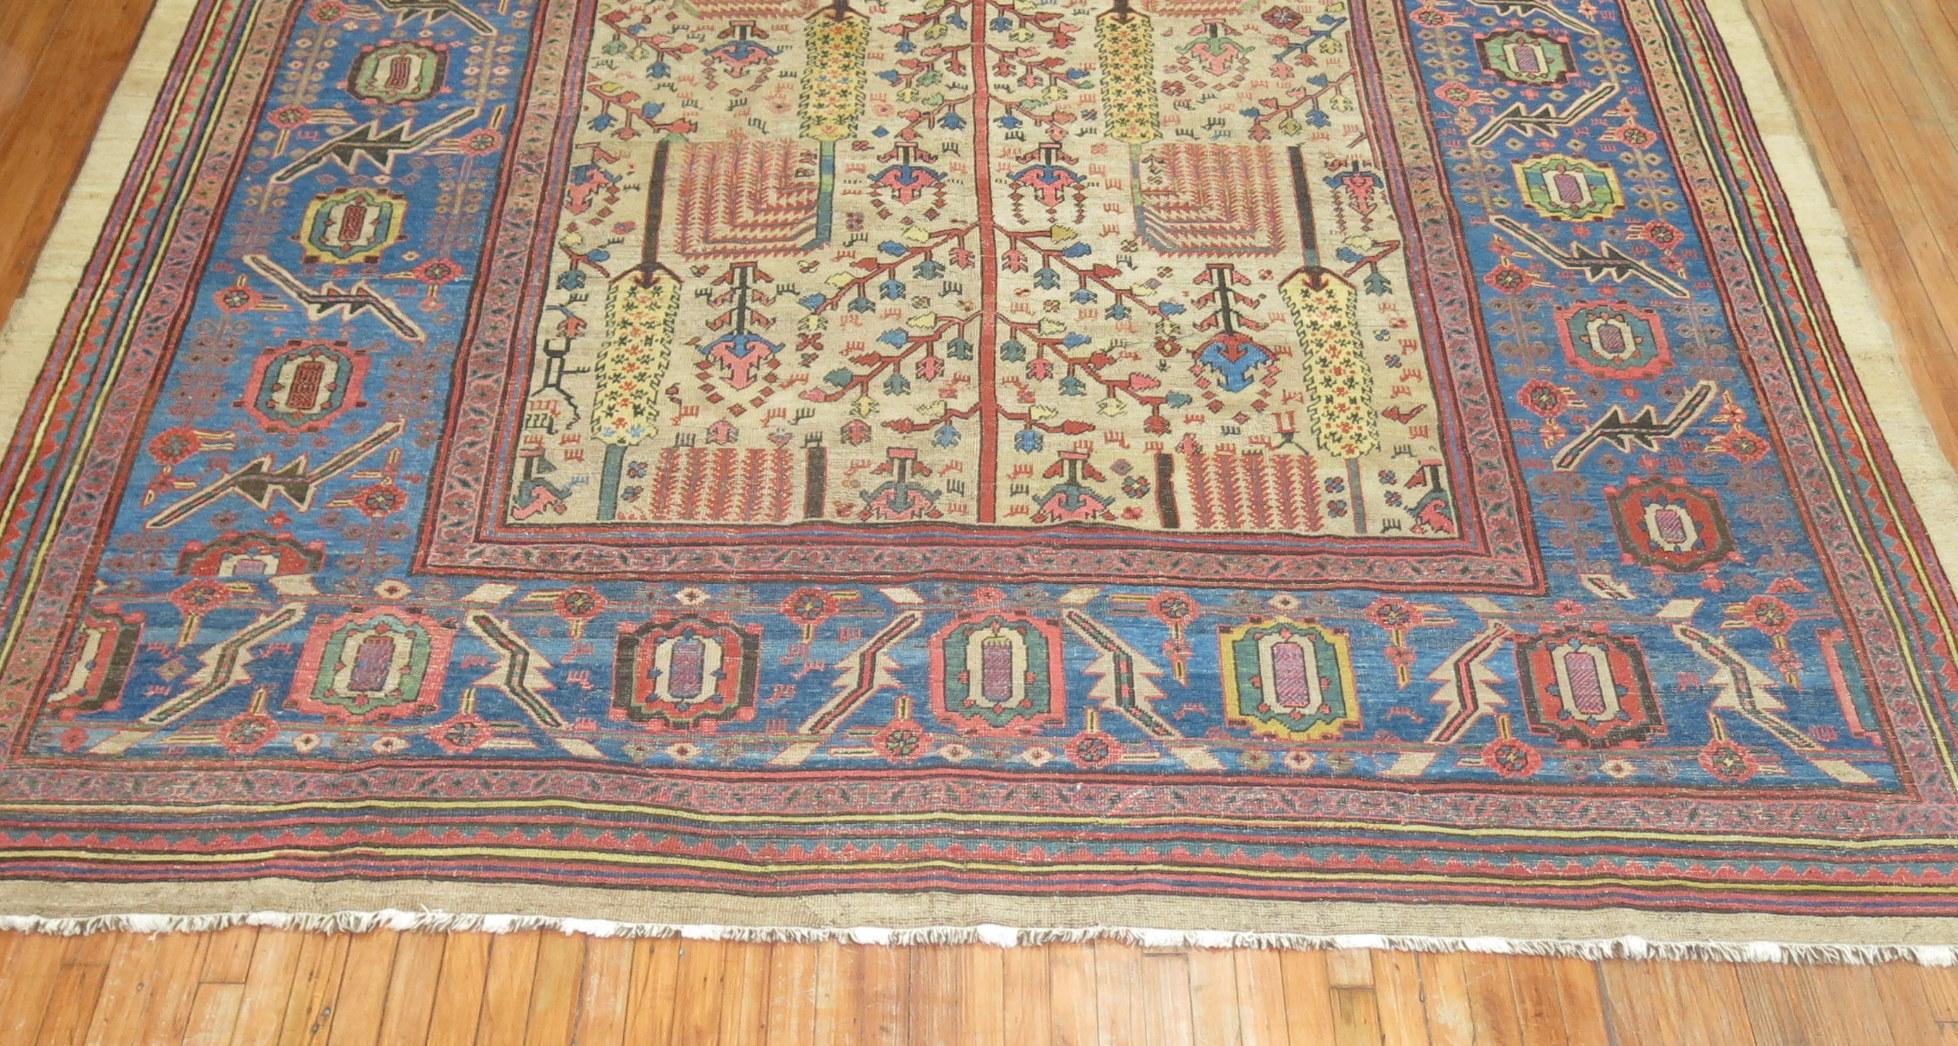 Camel field 19th century Persian Bakshaish rug featuring a large scale tree of light design on a camel field surrounded by a large sky blue border

Bakshaish carpets are some of the most highly sought after and elite carpets produced in the 19th